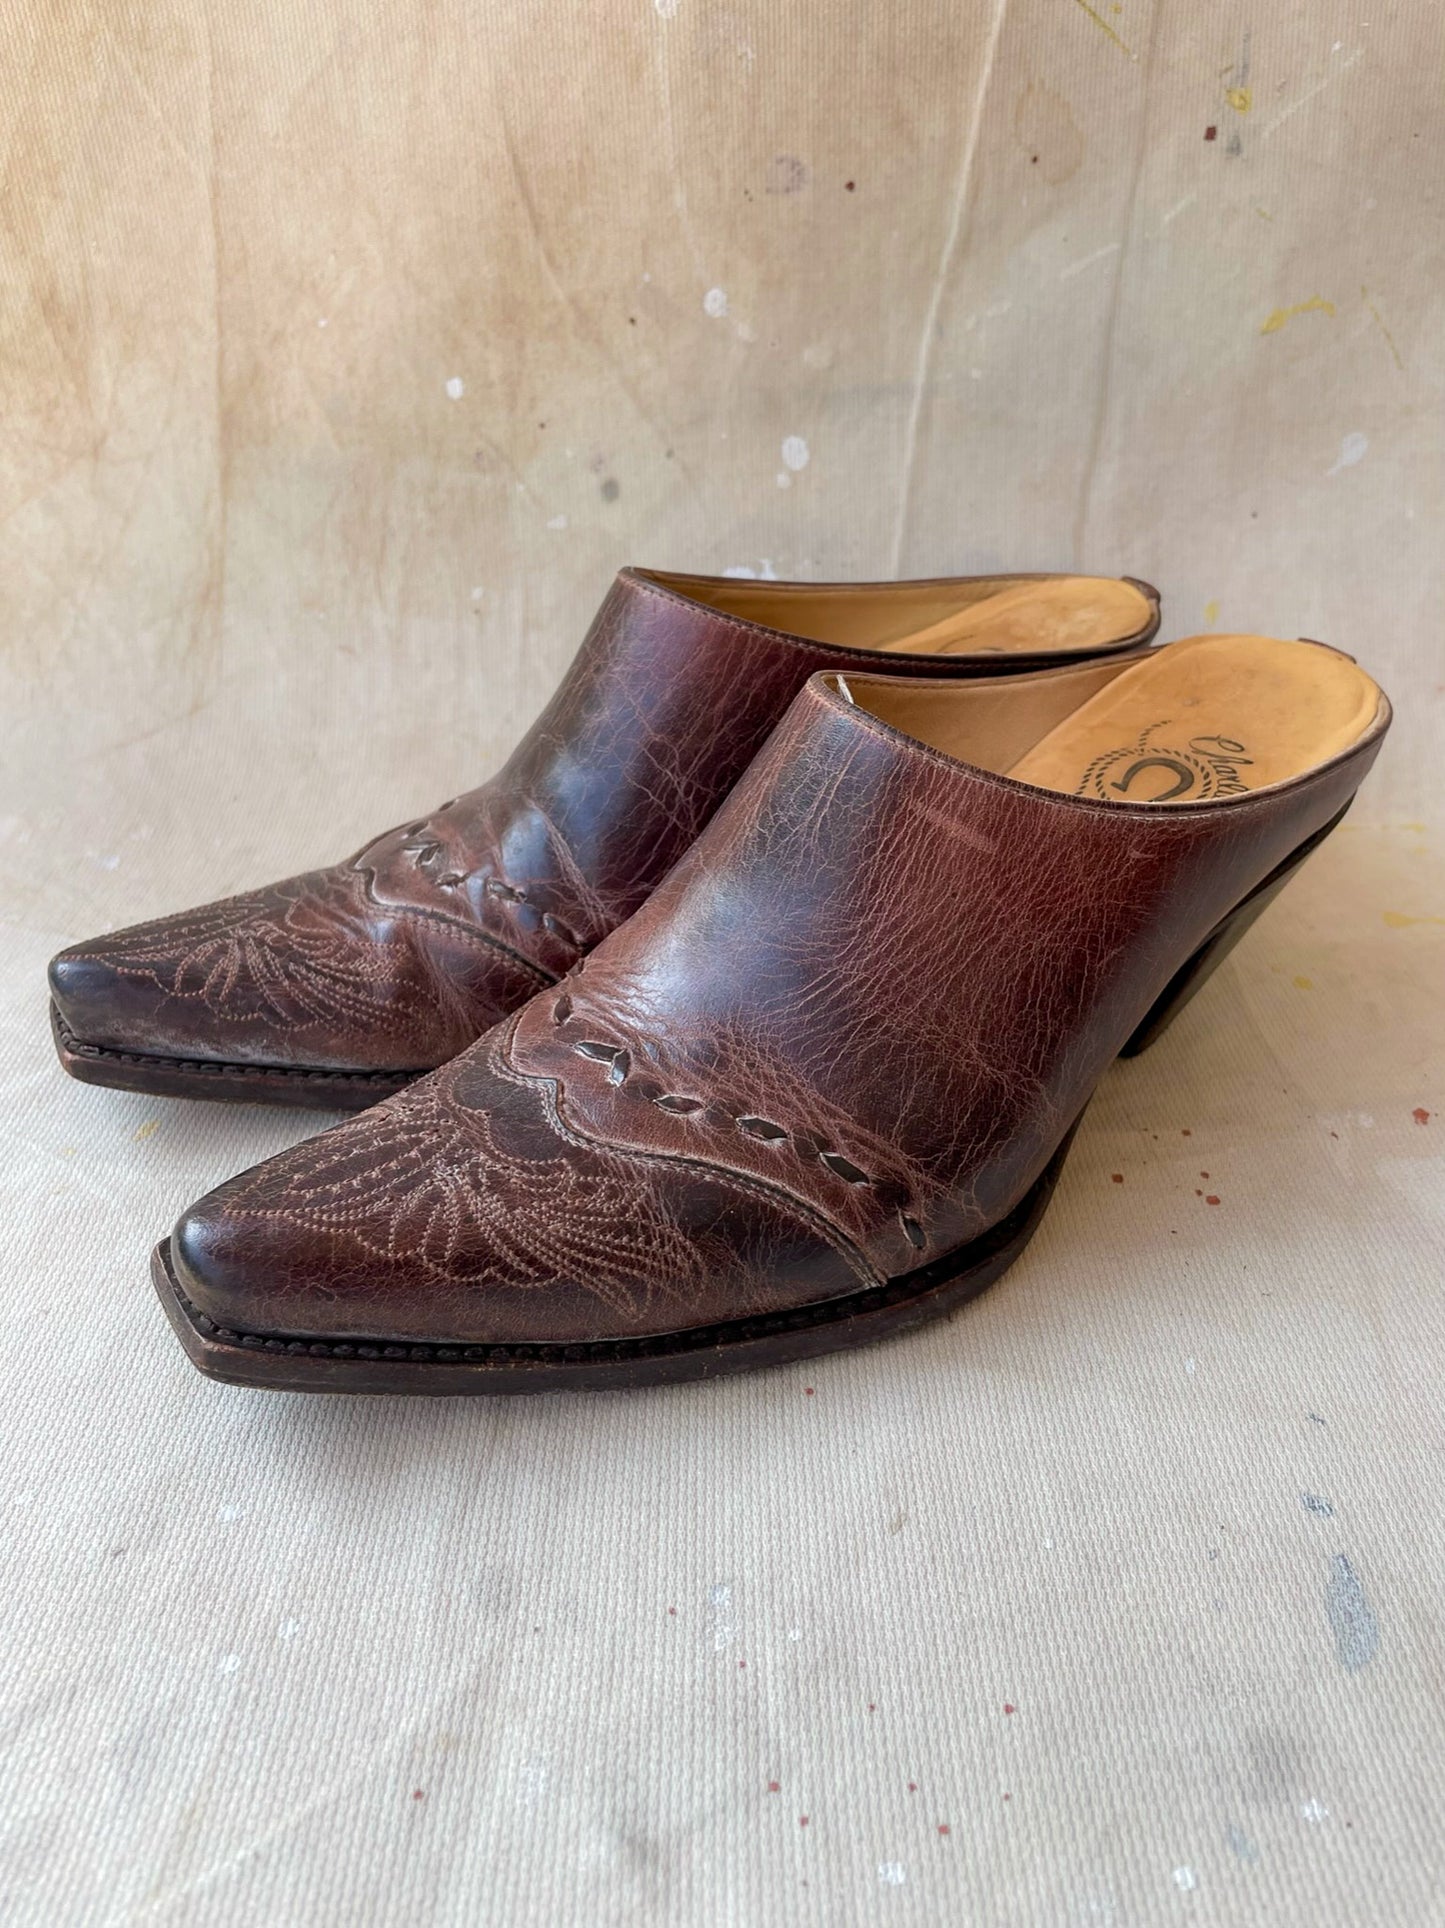 Lucchese Leather Mule —[6.5]